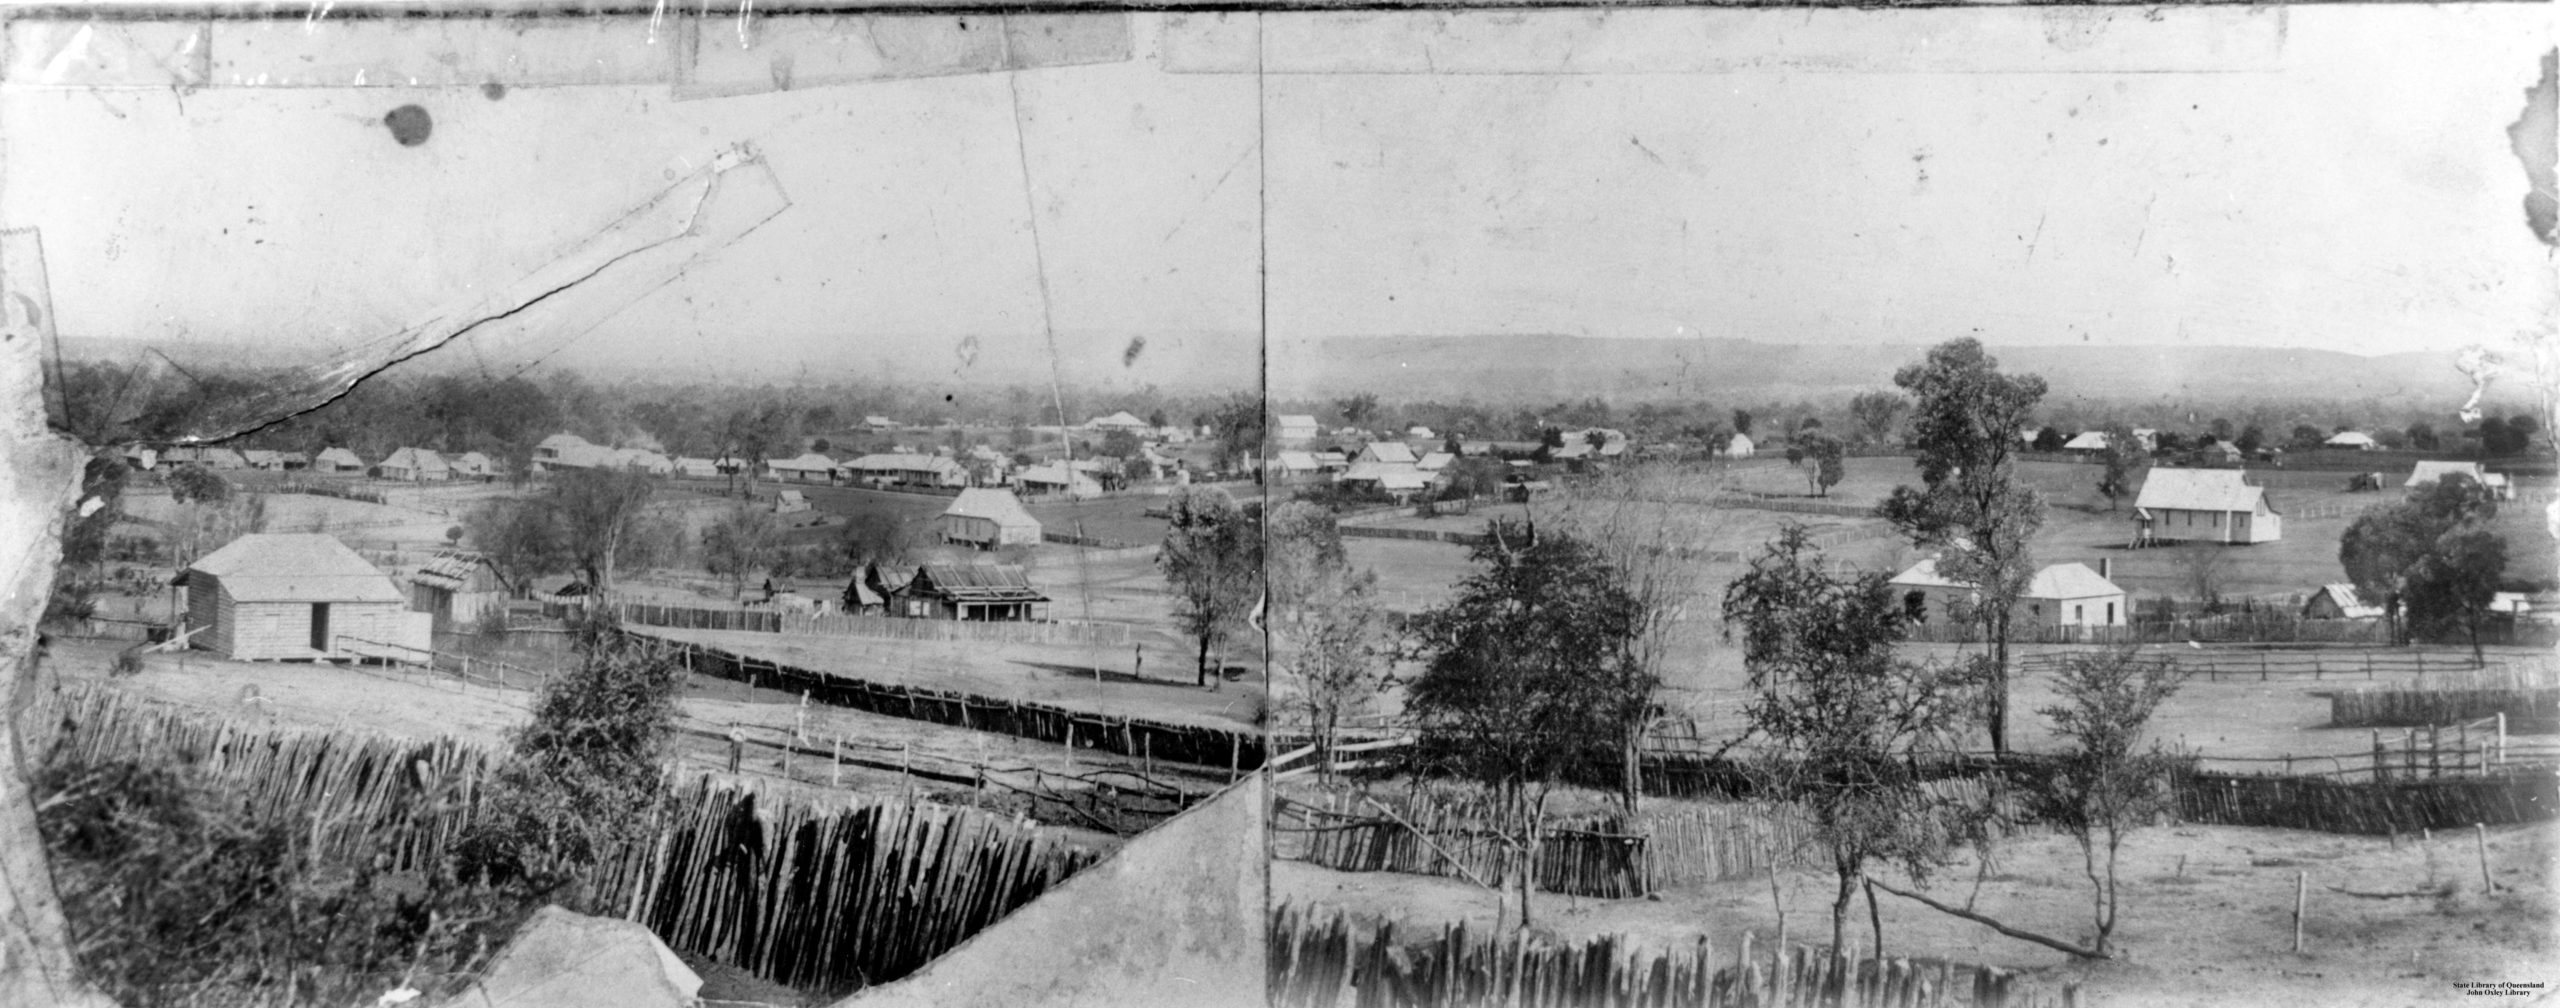 Photograph of Taroom, 1895. Source: John Oxley Library, State Library of Queensland, Negative No. 46534.